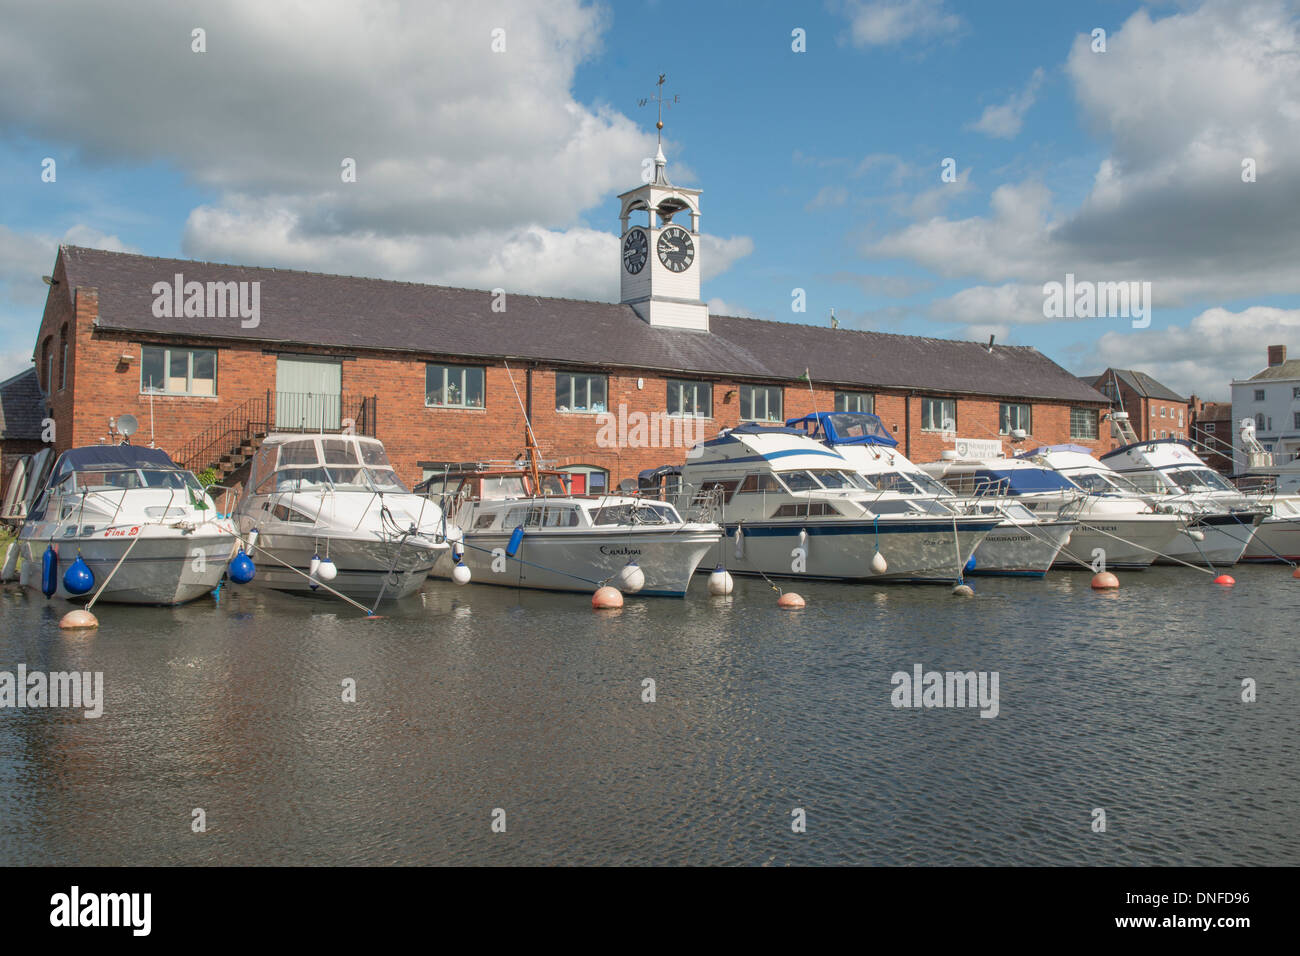 Boat marina at Stourport on Severn in the county of Worcestershire, England. This shows the moorings at the Stourport Yatch Club Stock Photo